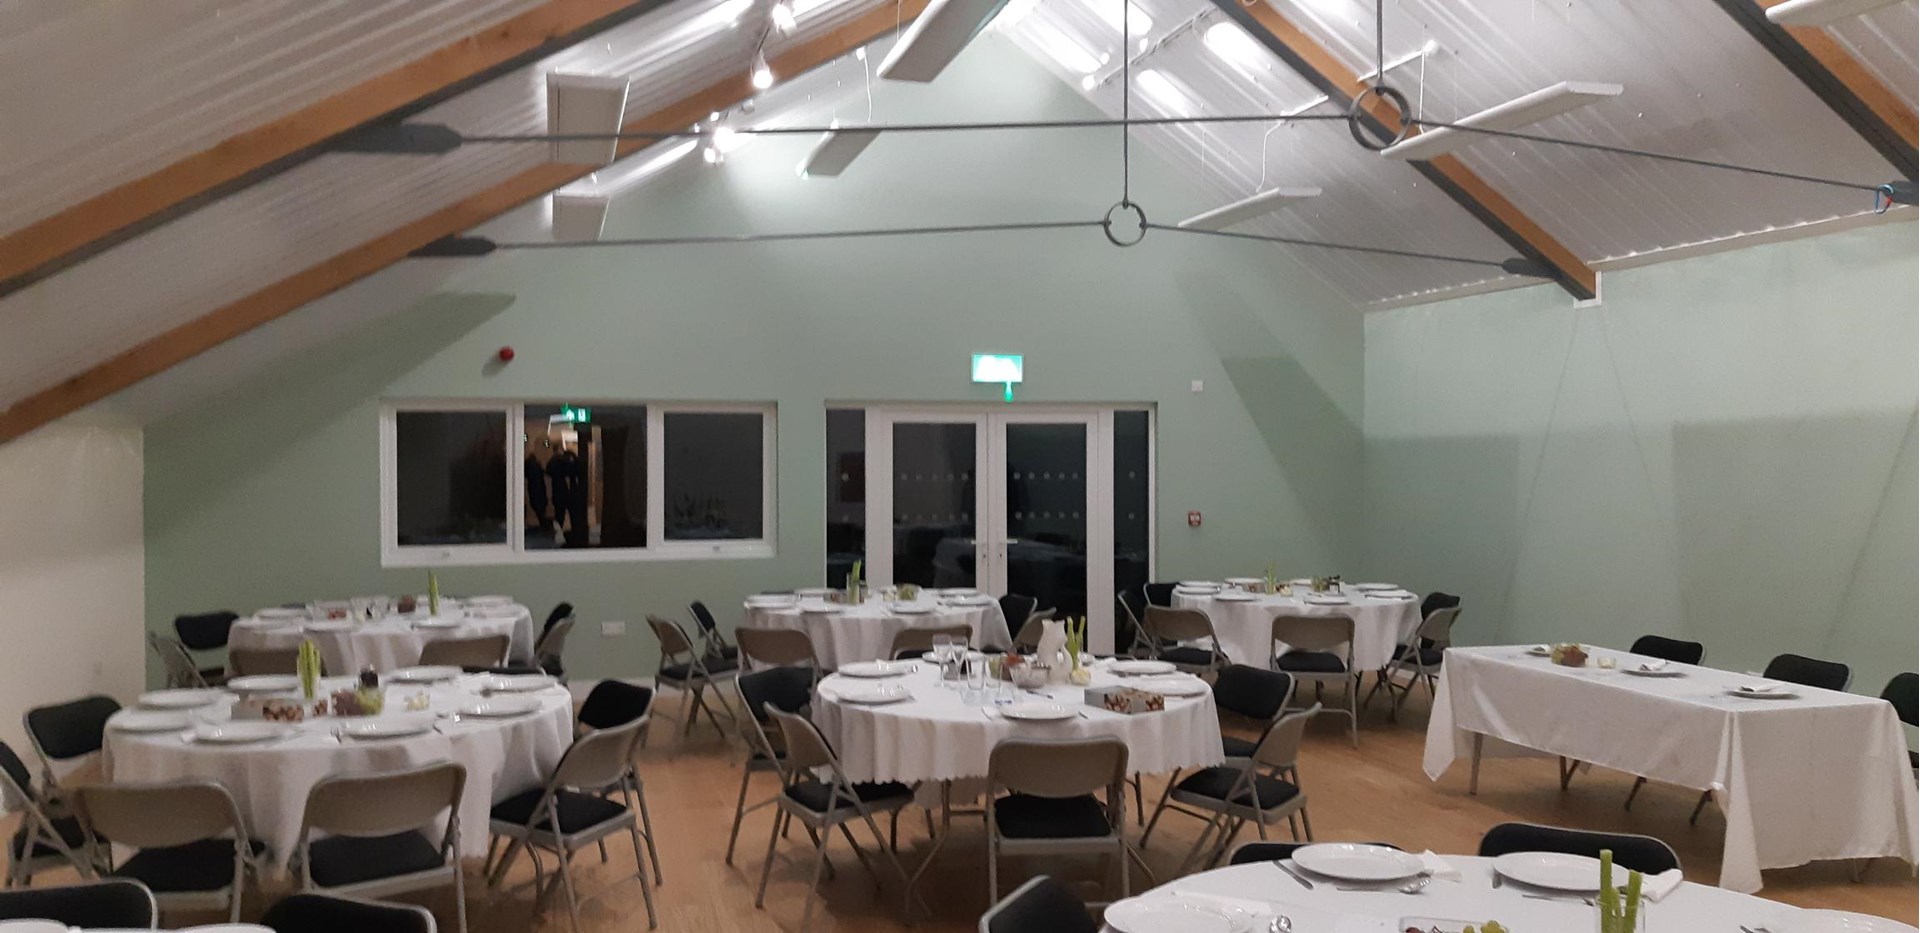 The new hall ready for a wedding reception